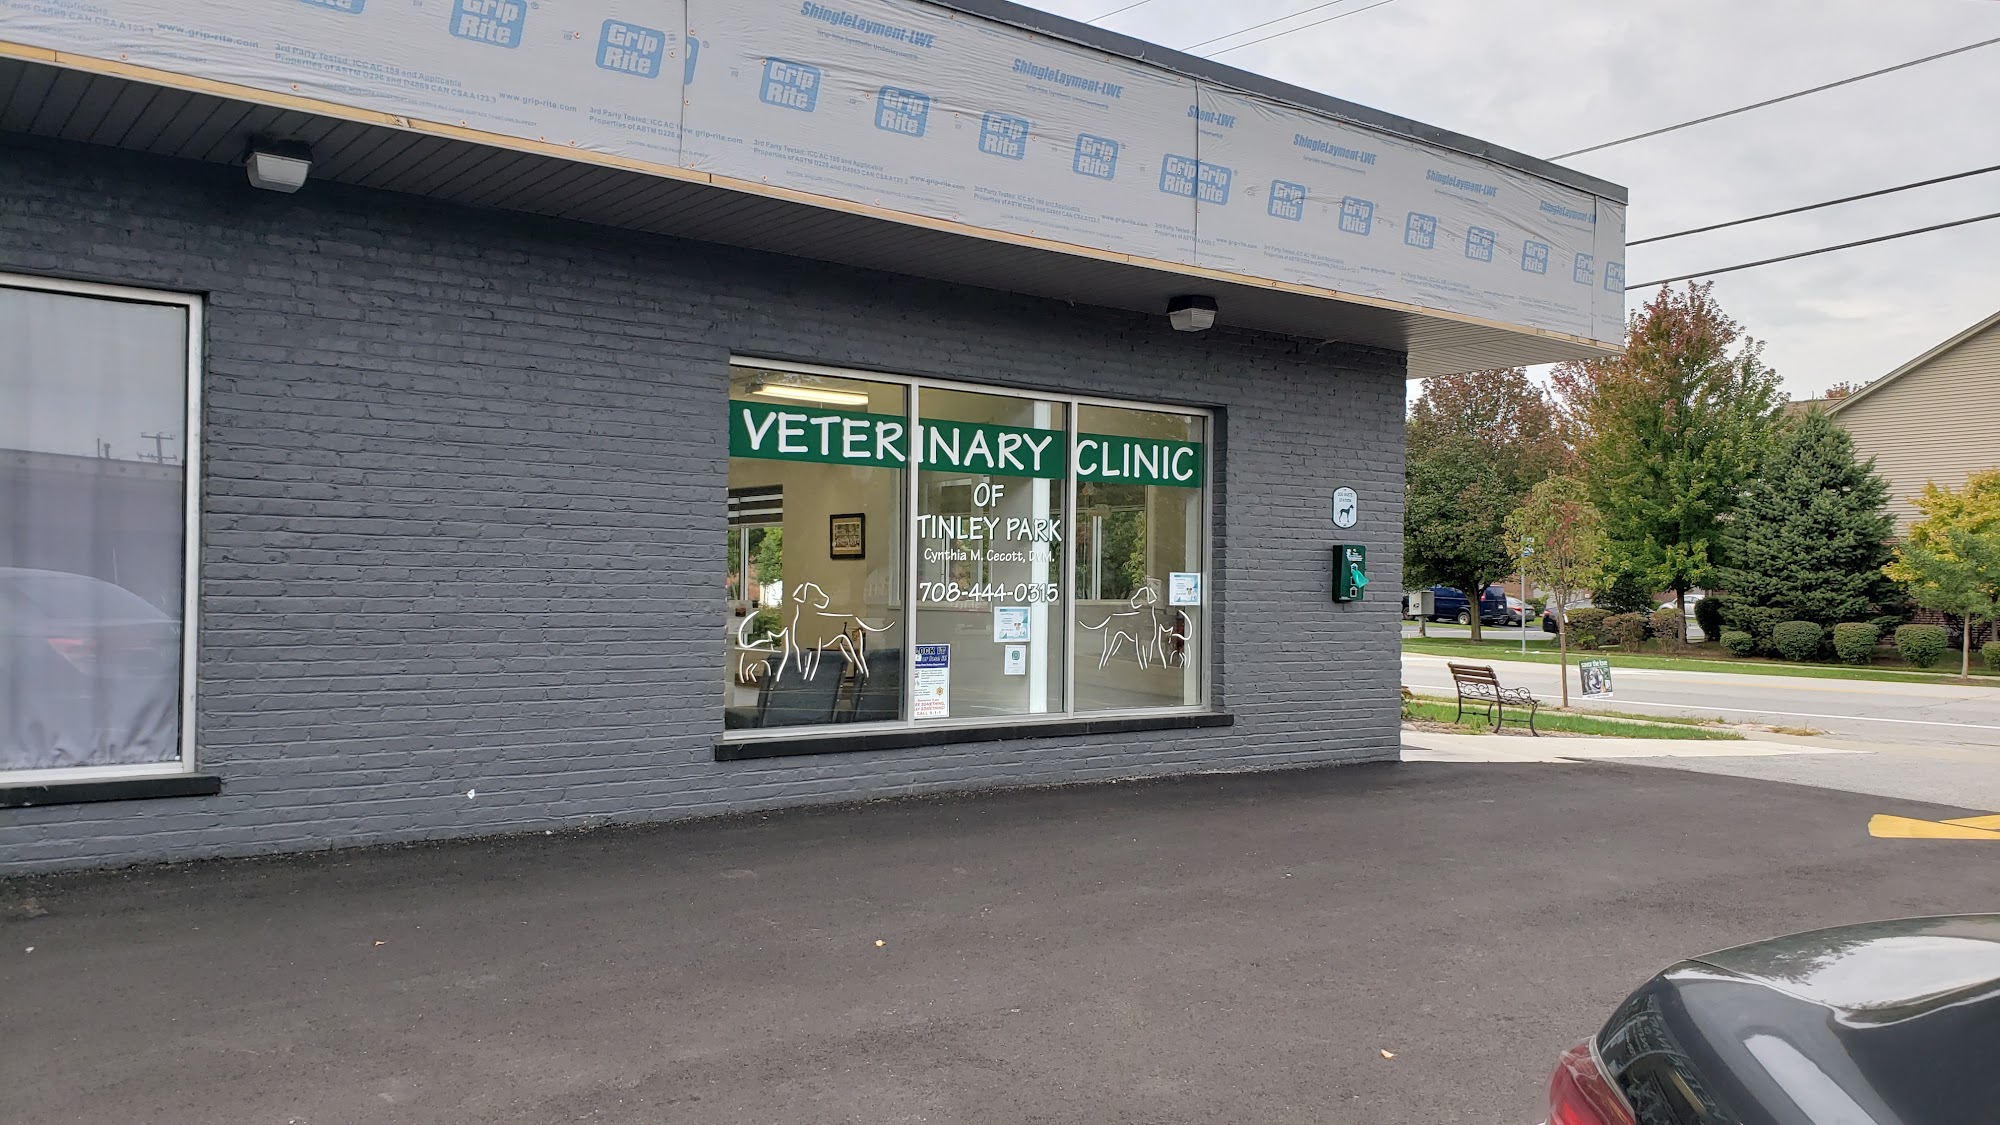 The Veterinary Clinic of Tinley Park